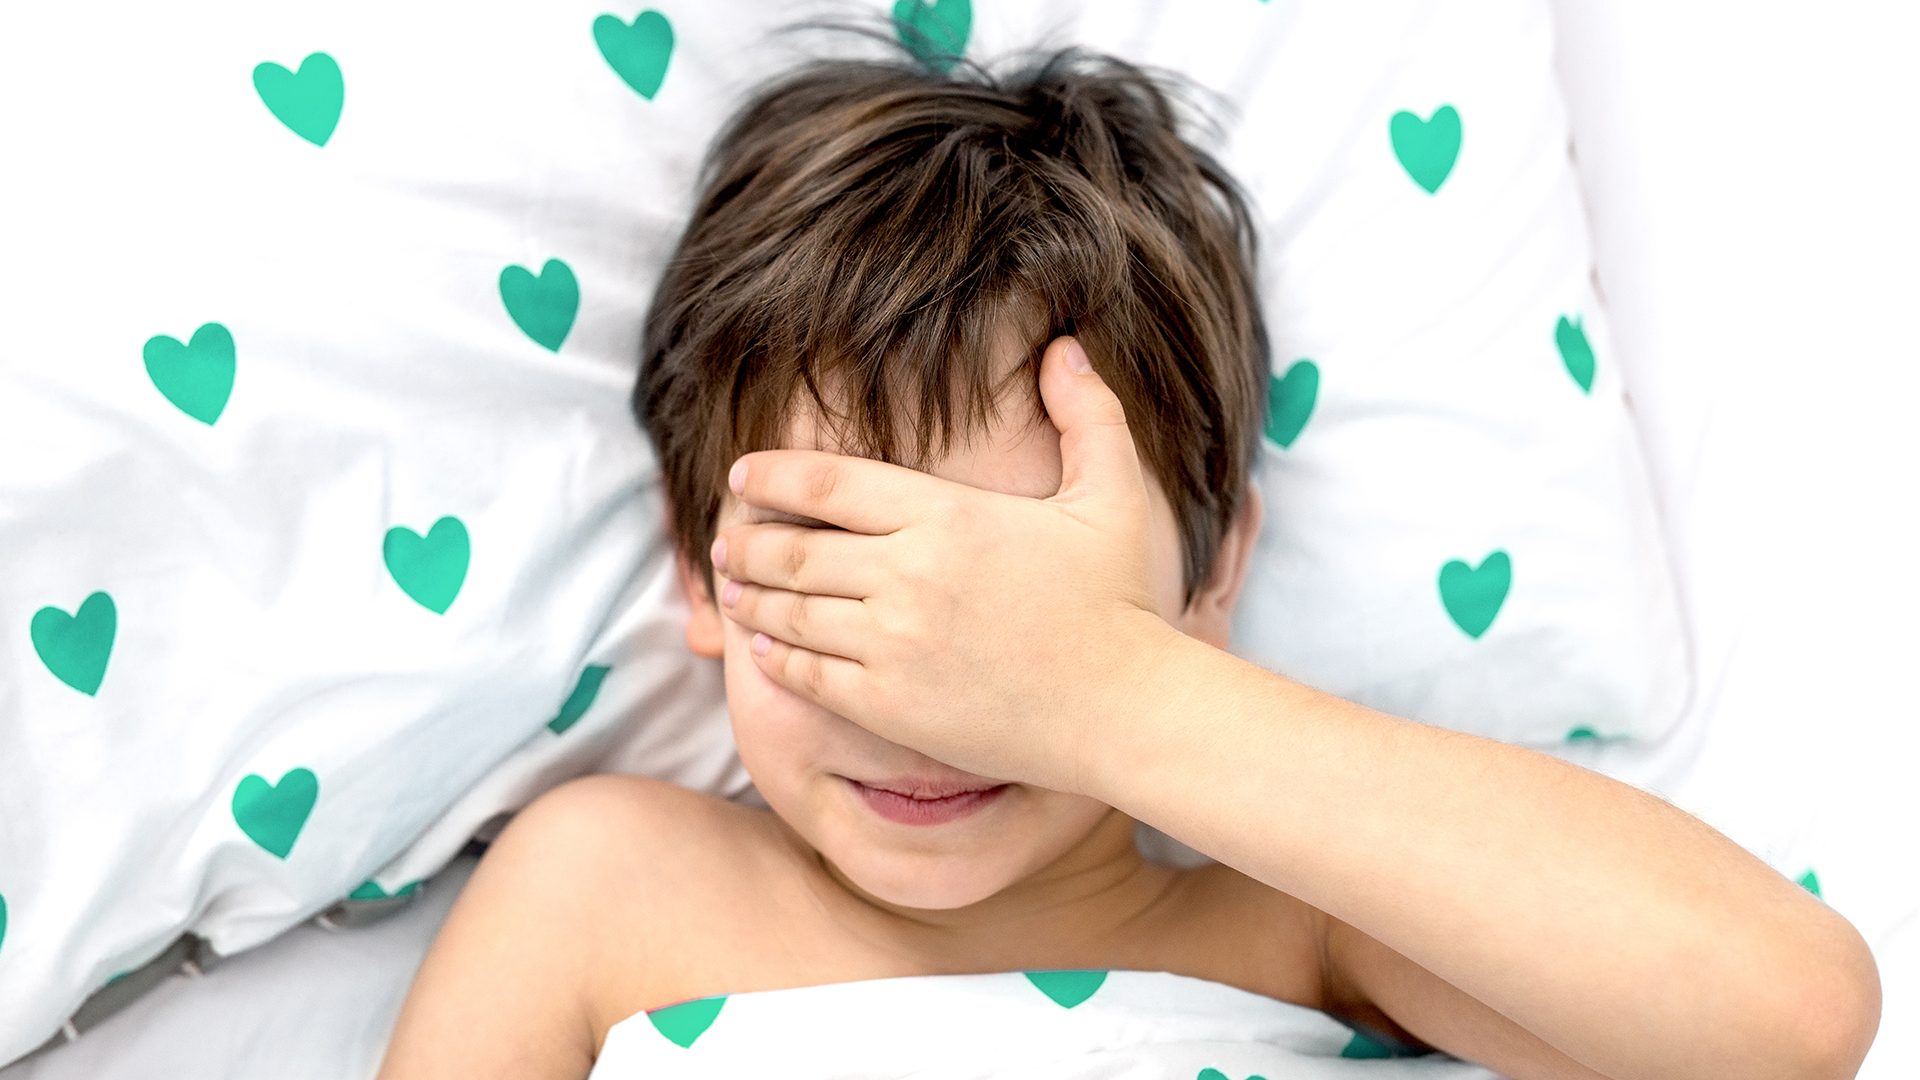 the boy lies in a bed with green hearts, his face in his hands. emotions without a face. white color, top view